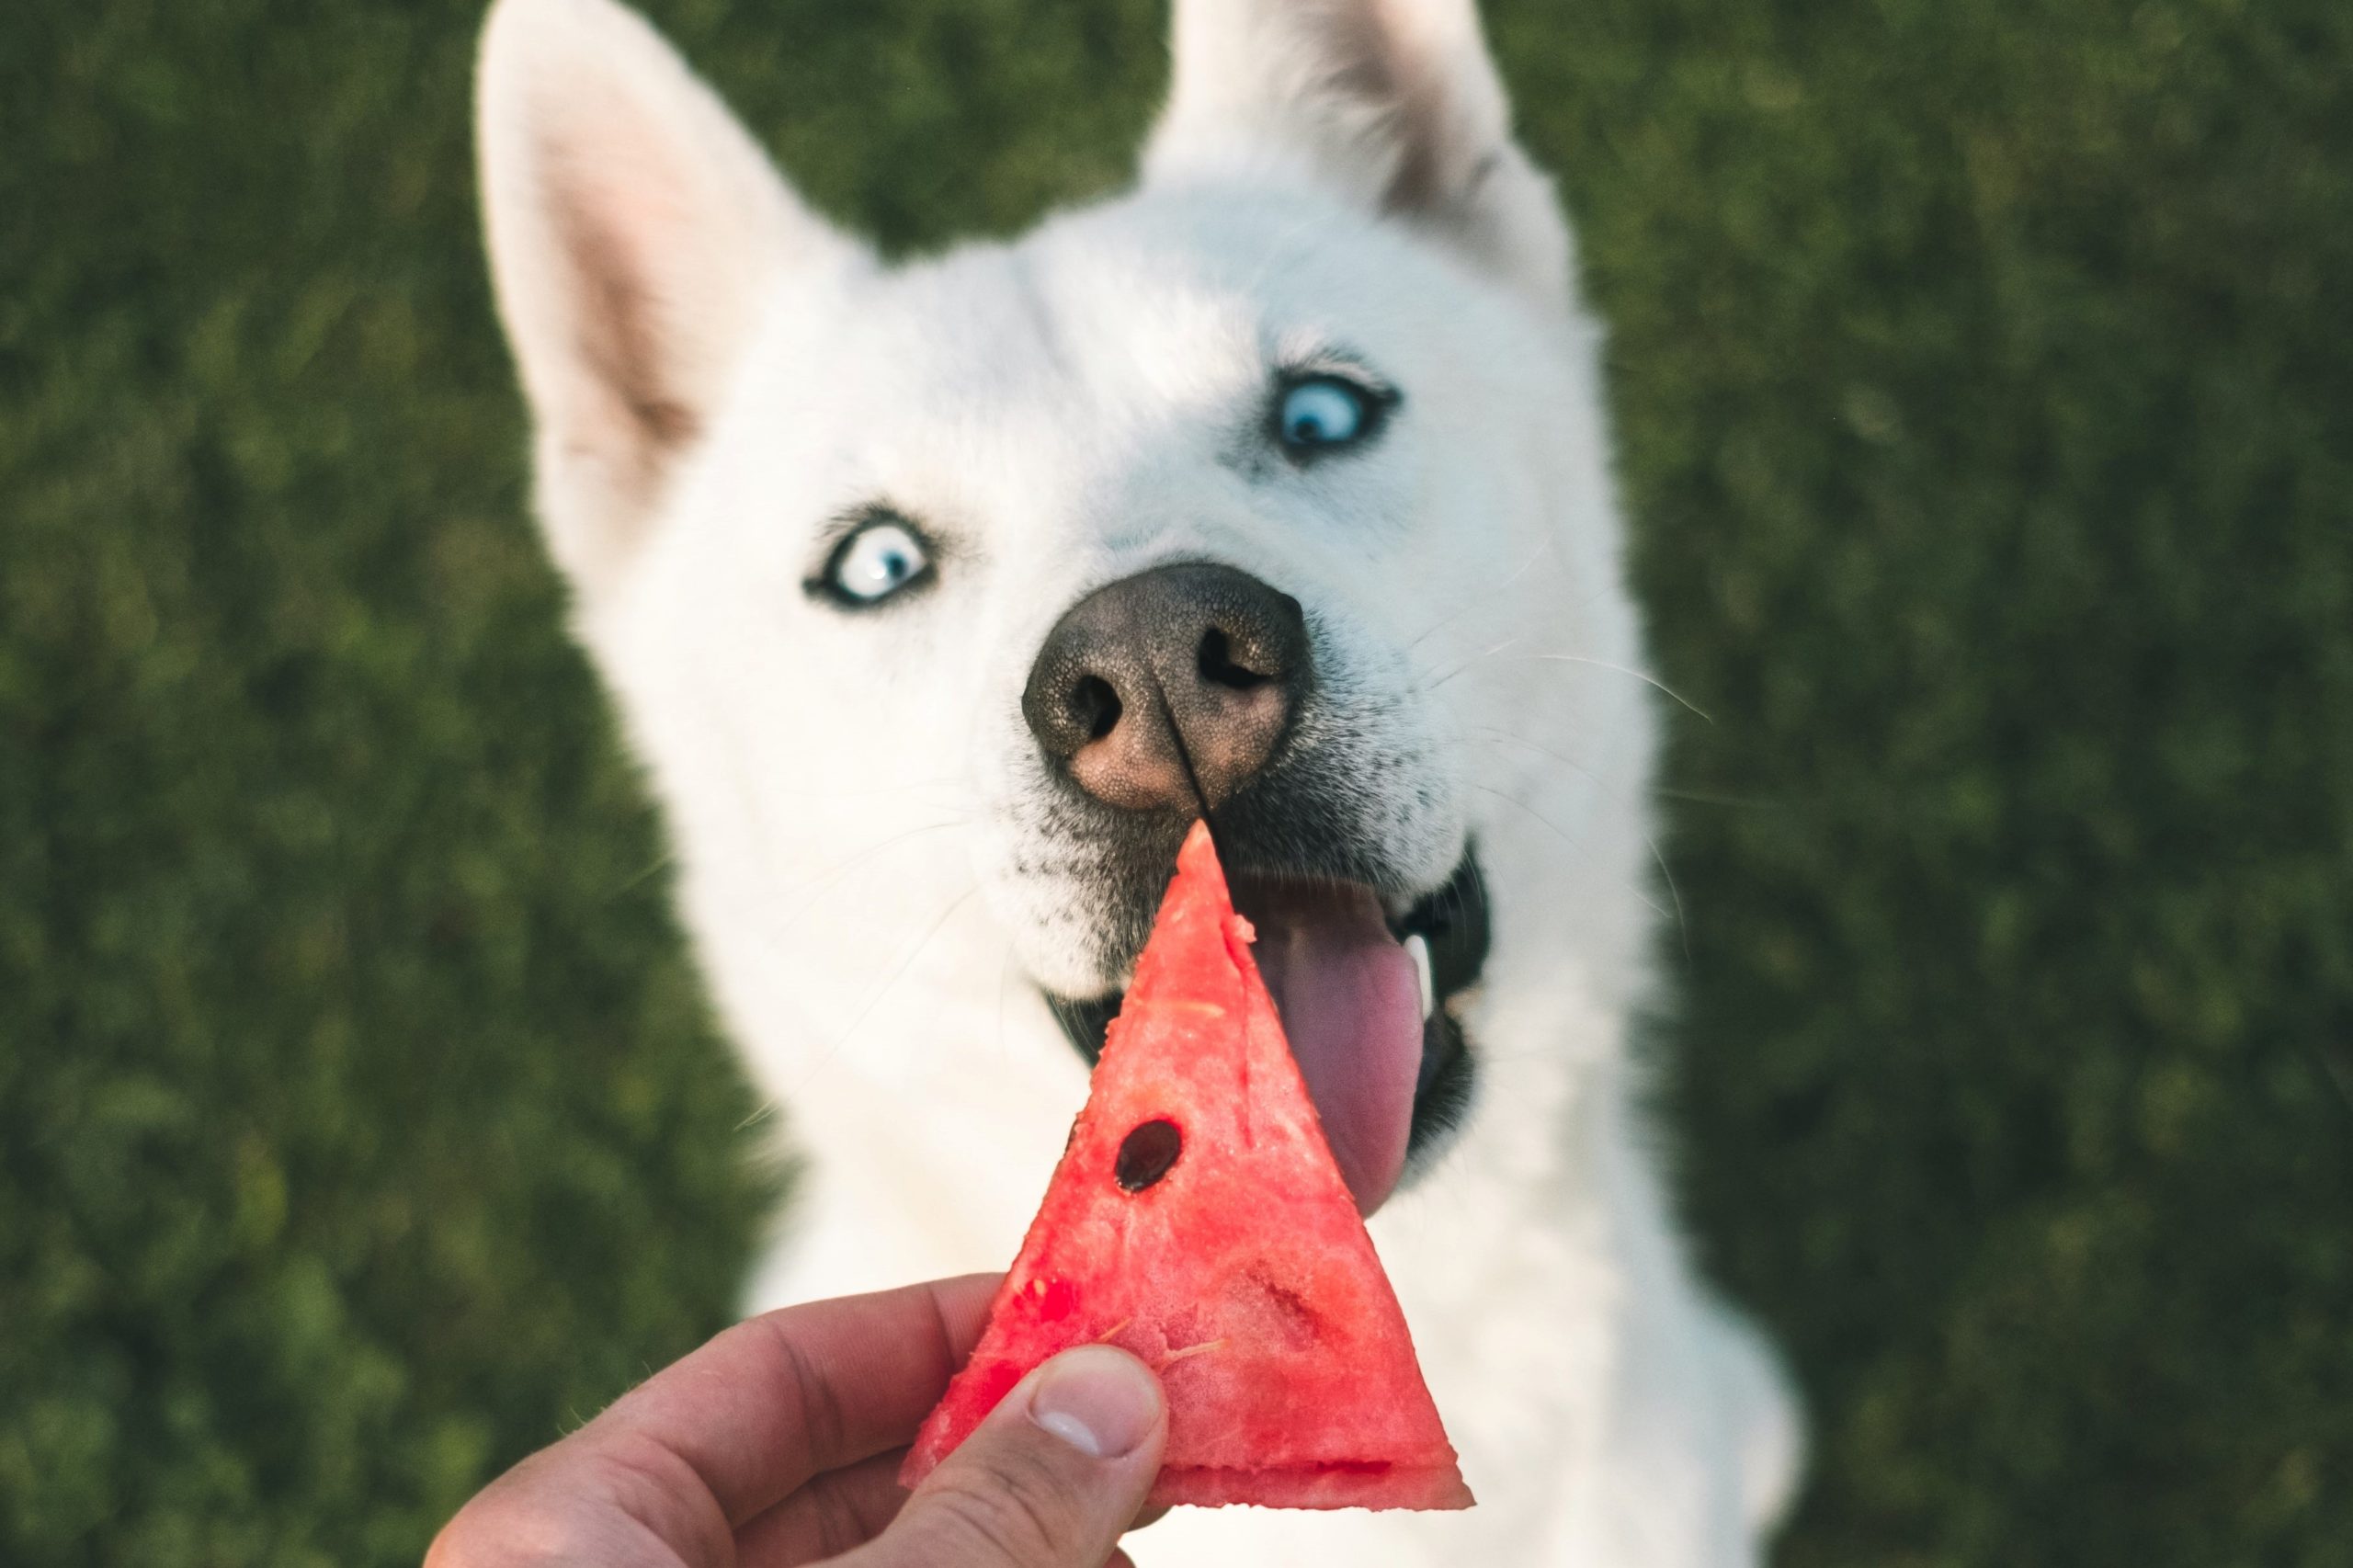 List Of Fruits That Are Safe And Dangerous For Your Pet Dog's Health